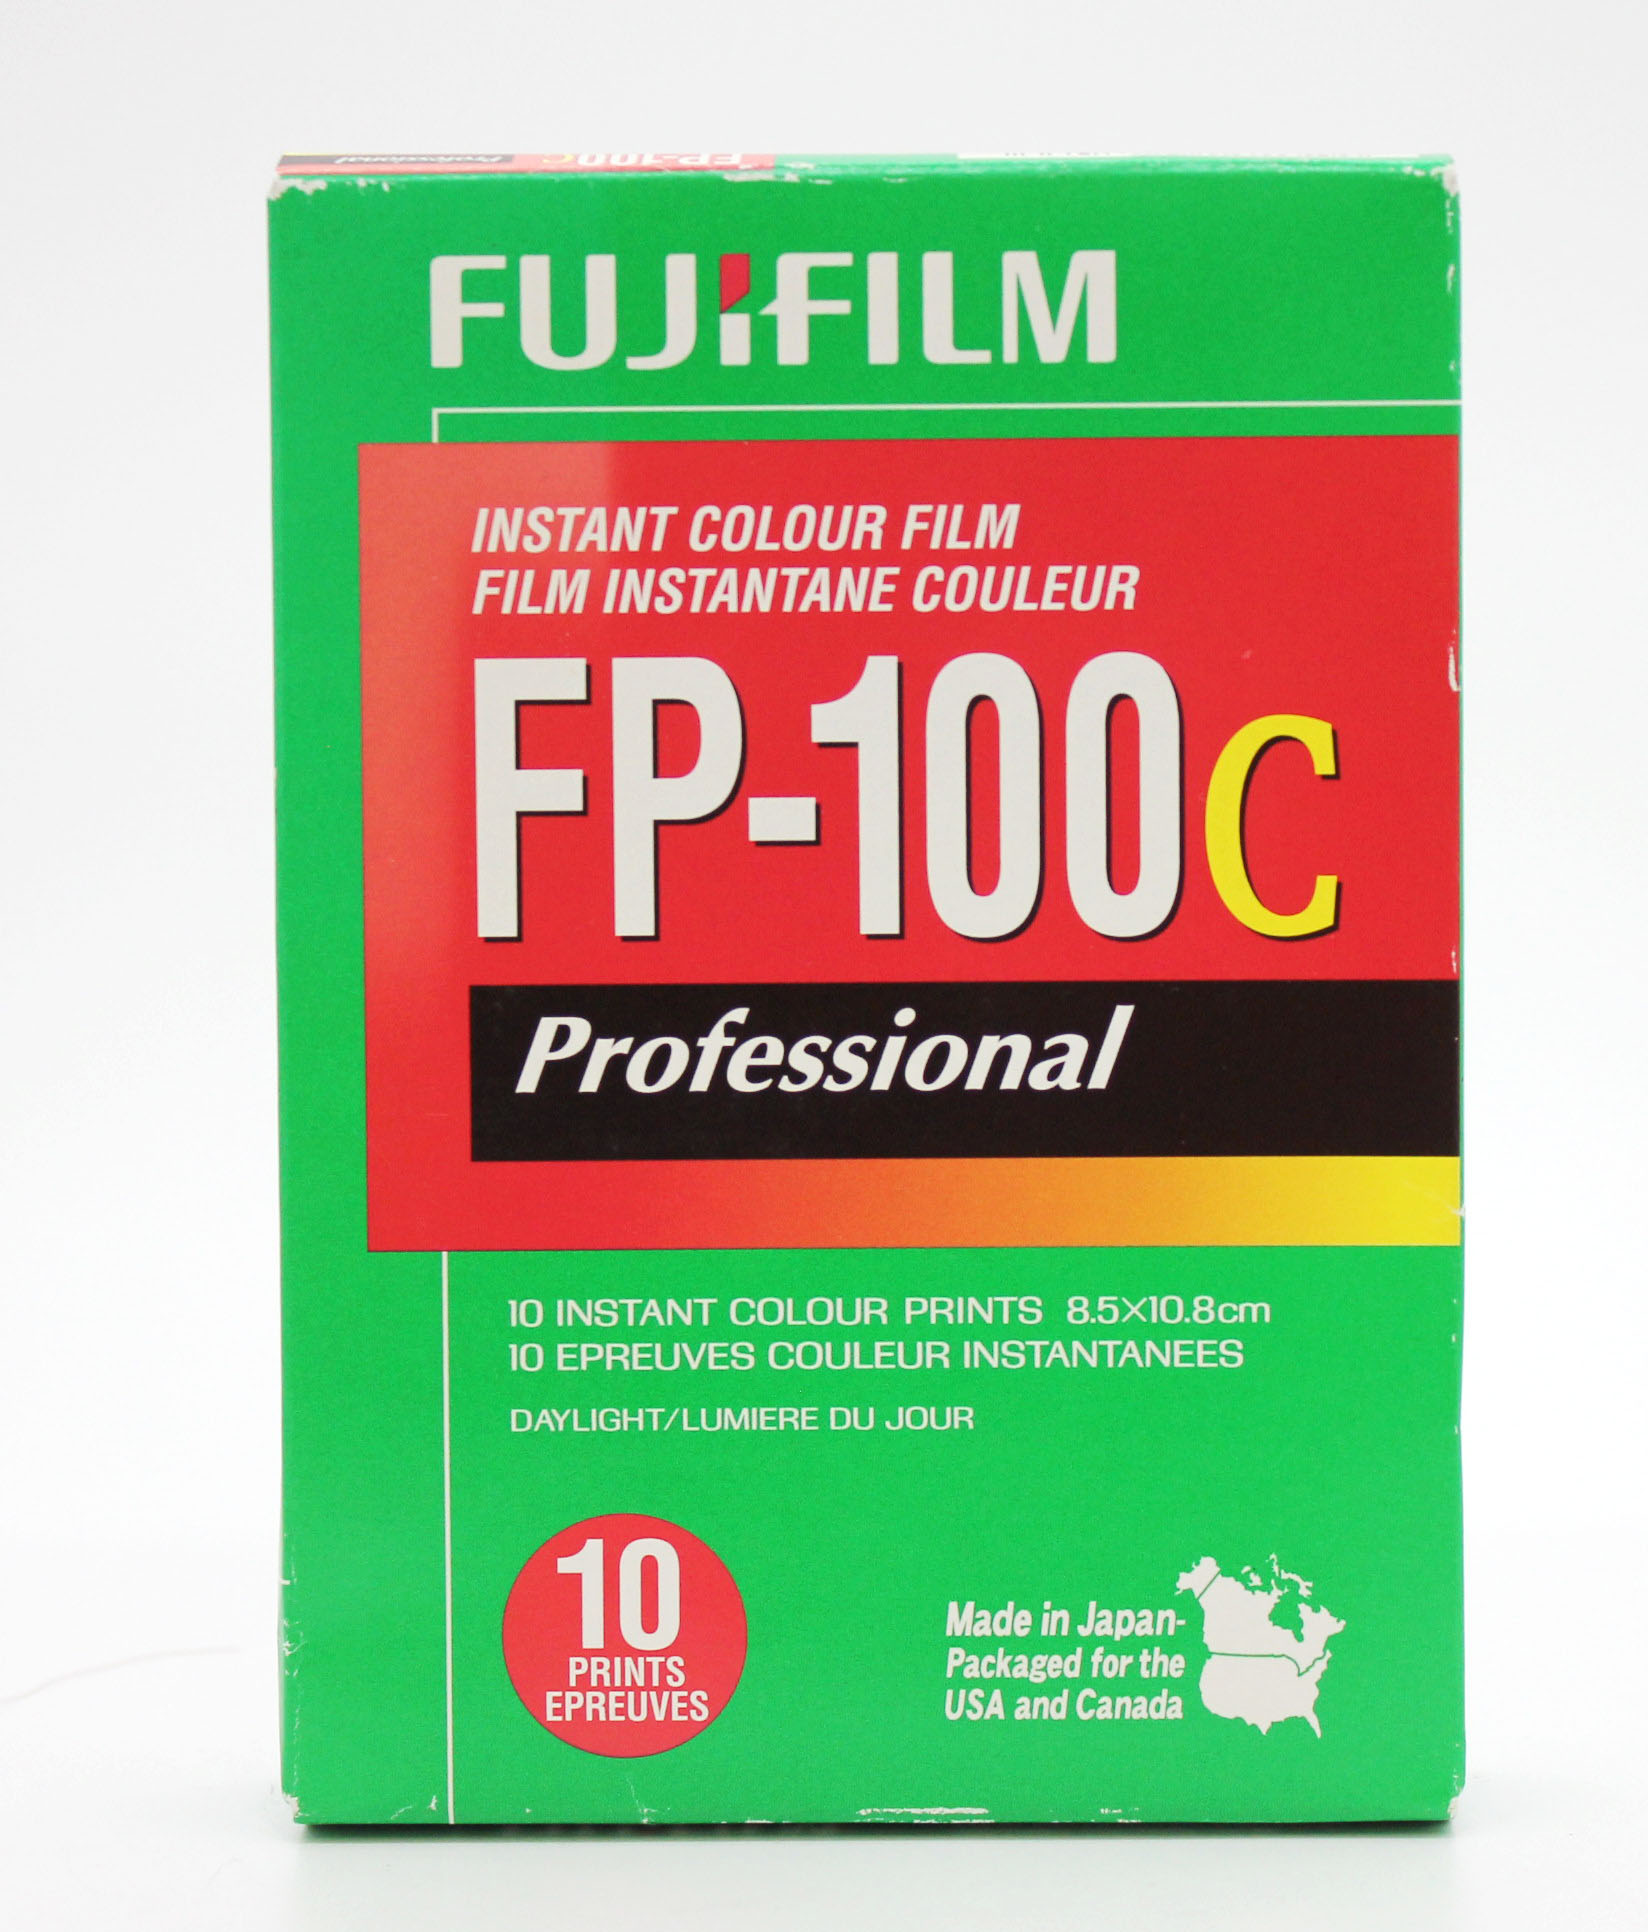  Fujifilm FP-100C Professional Instant Color Film (Exp 2014) from Japan Photo 1